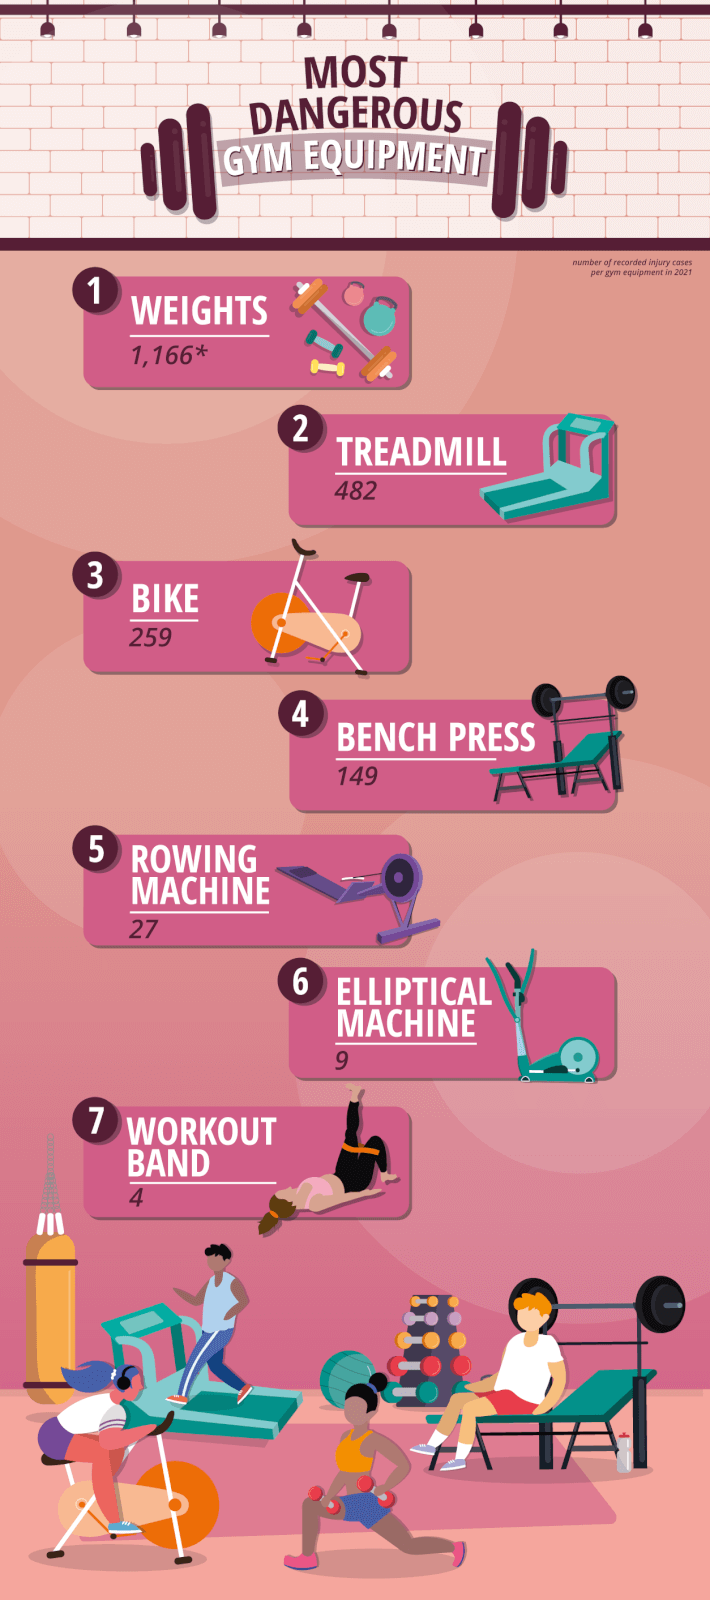 Image showing the most dangerous gym equipment, such as weights, treadmills, bikes and bench presses.